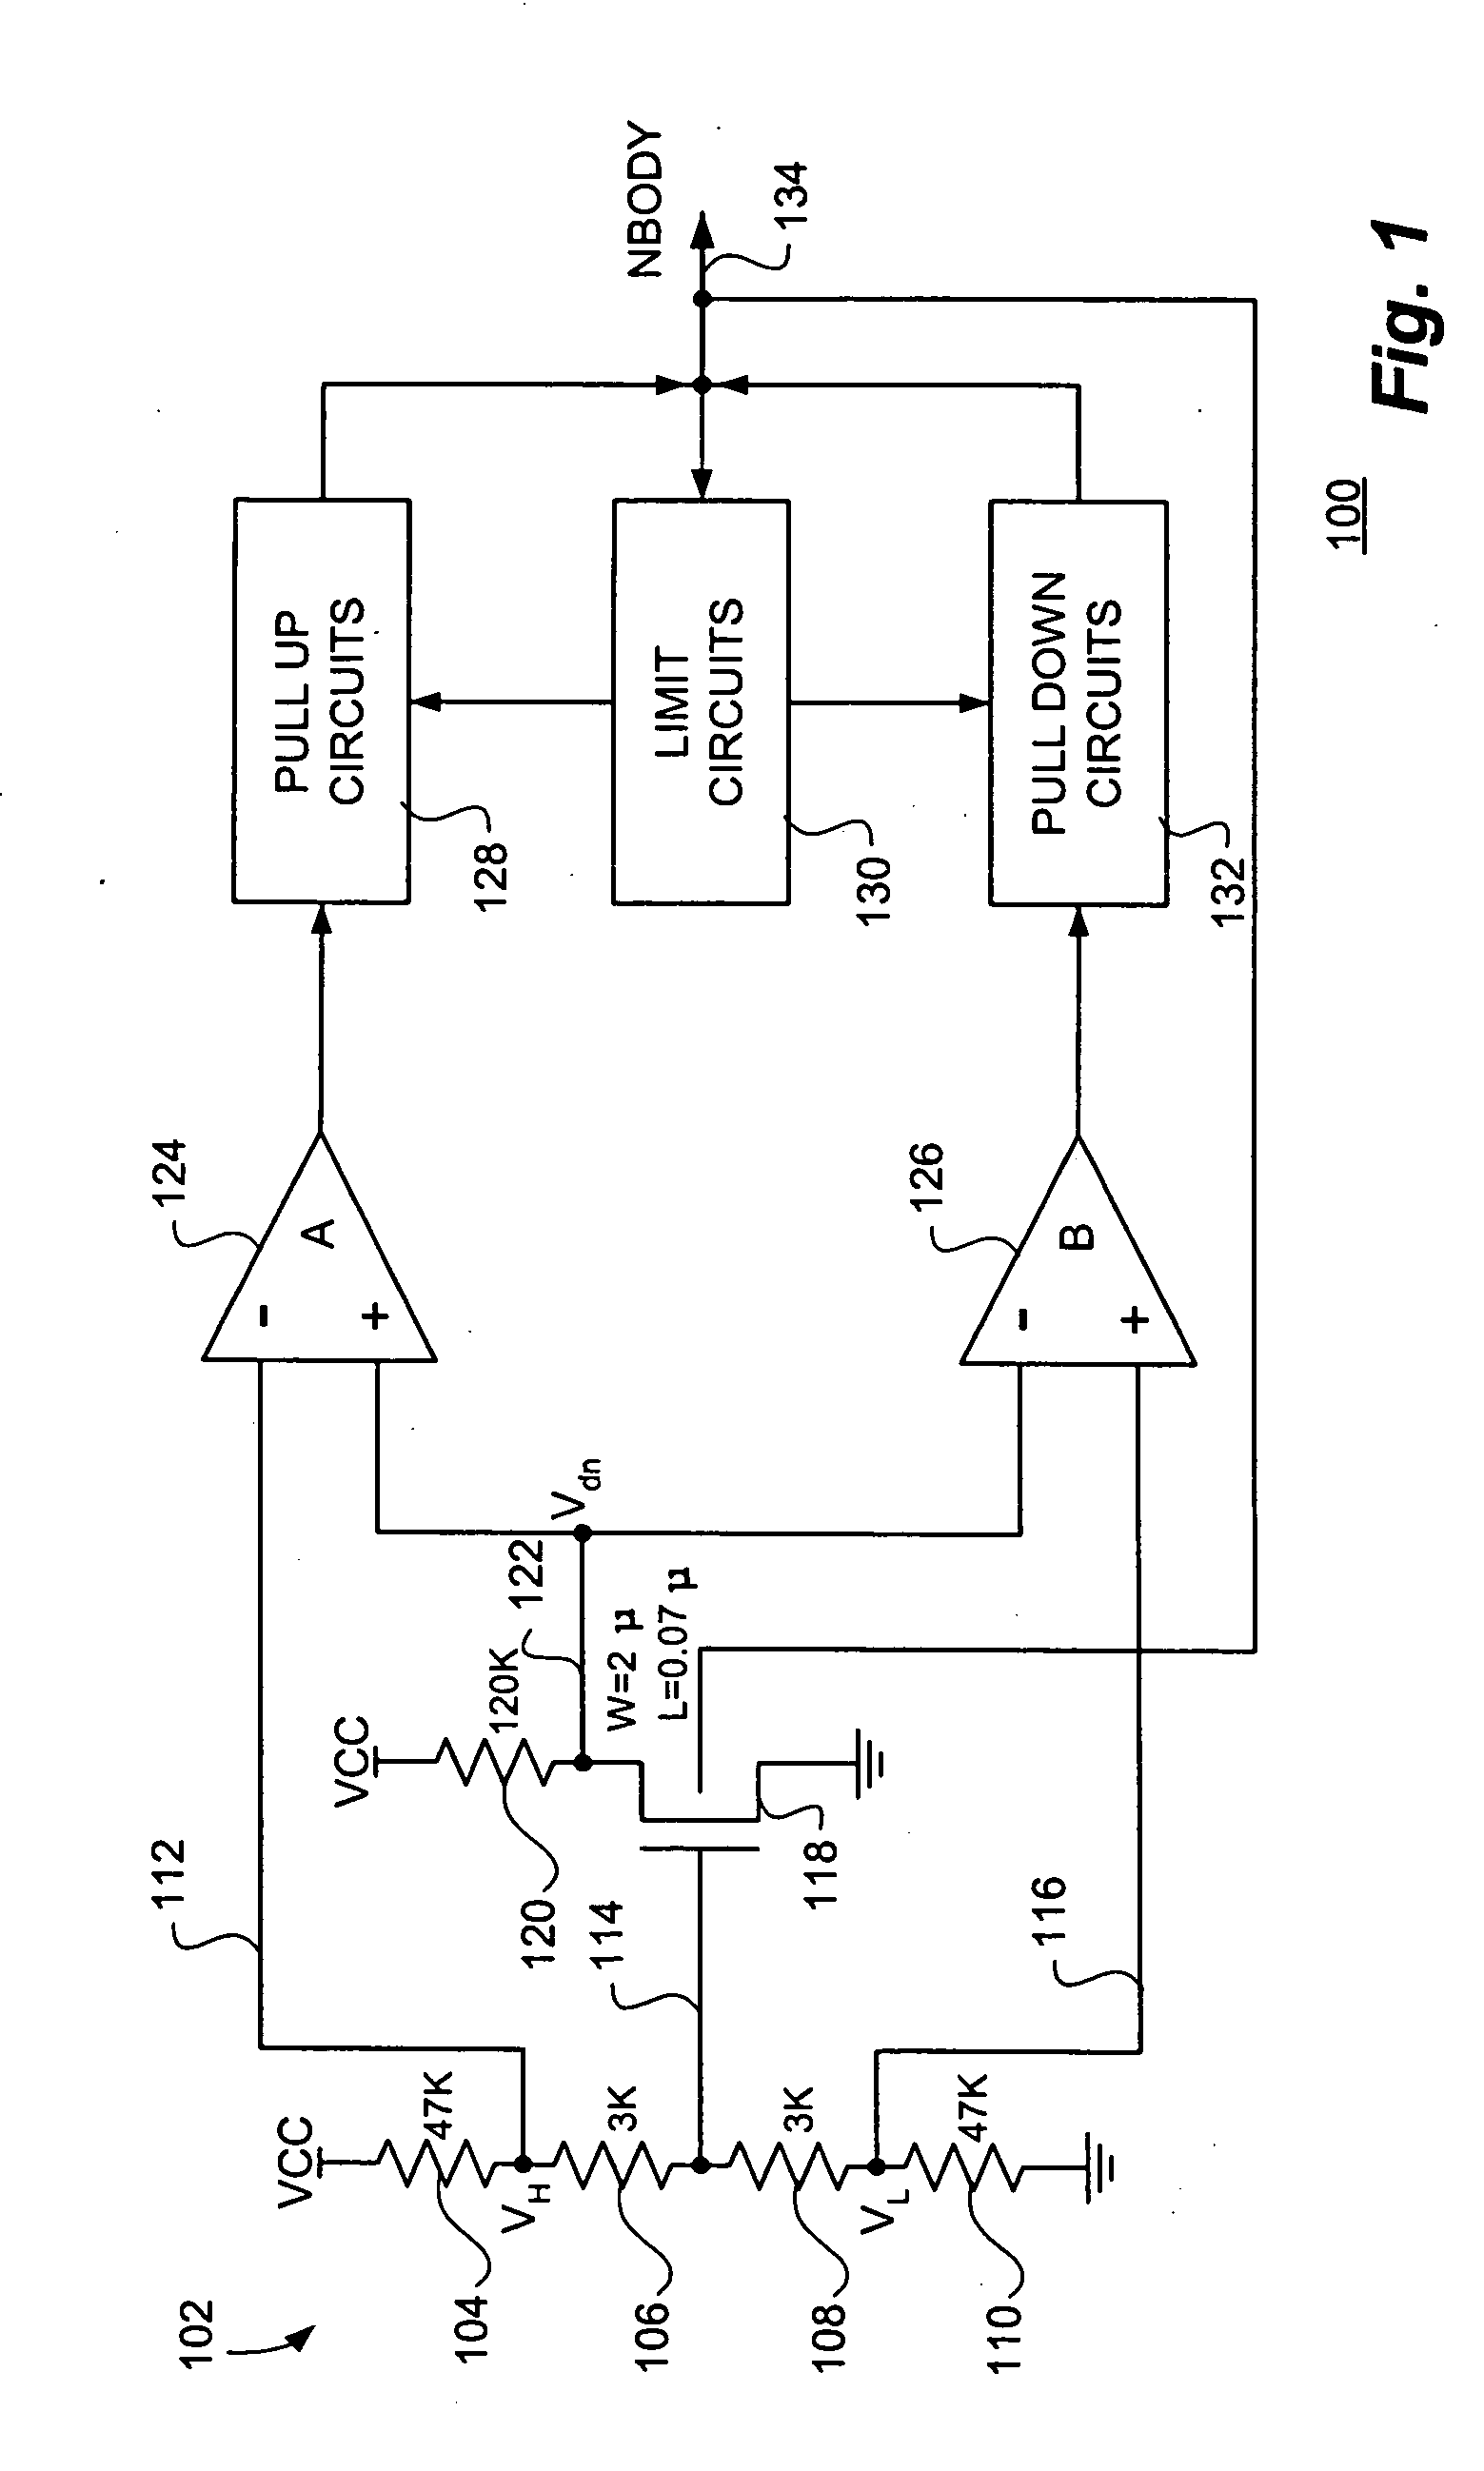 Integrated circuit transistor body bias regulation circuit and method for low voltage applications